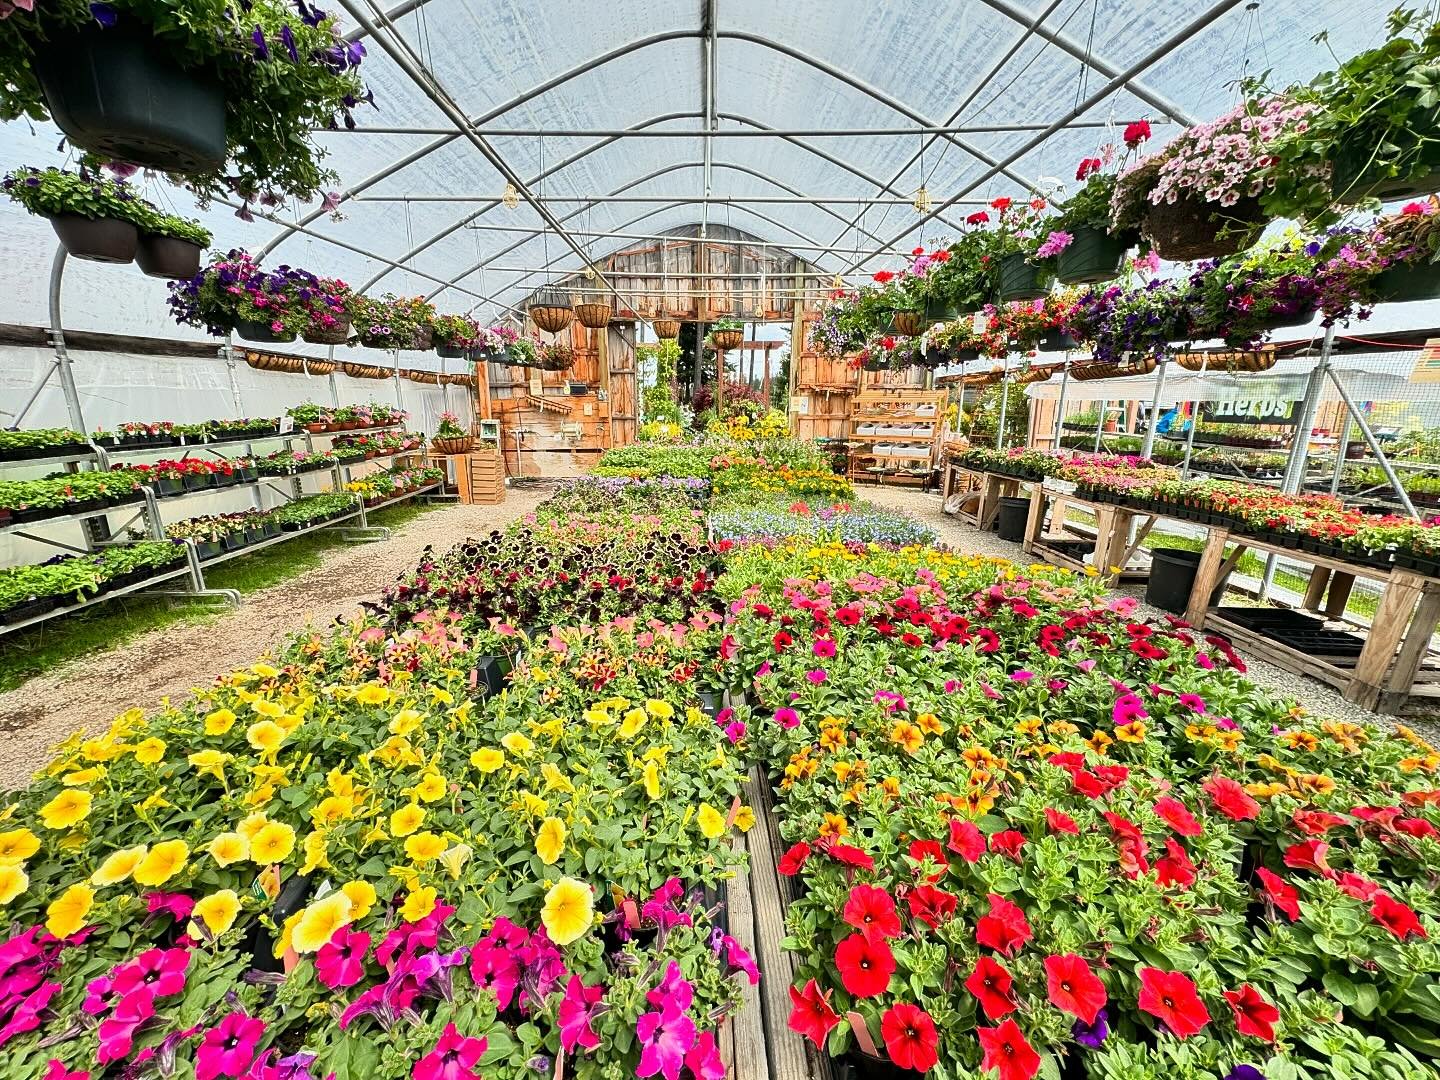 Great news! All of the annuals in greenhouse 2 have been restocked, along with more hanging flower baskets! 💐

The selection is quite beautiful! Come see for yourself!